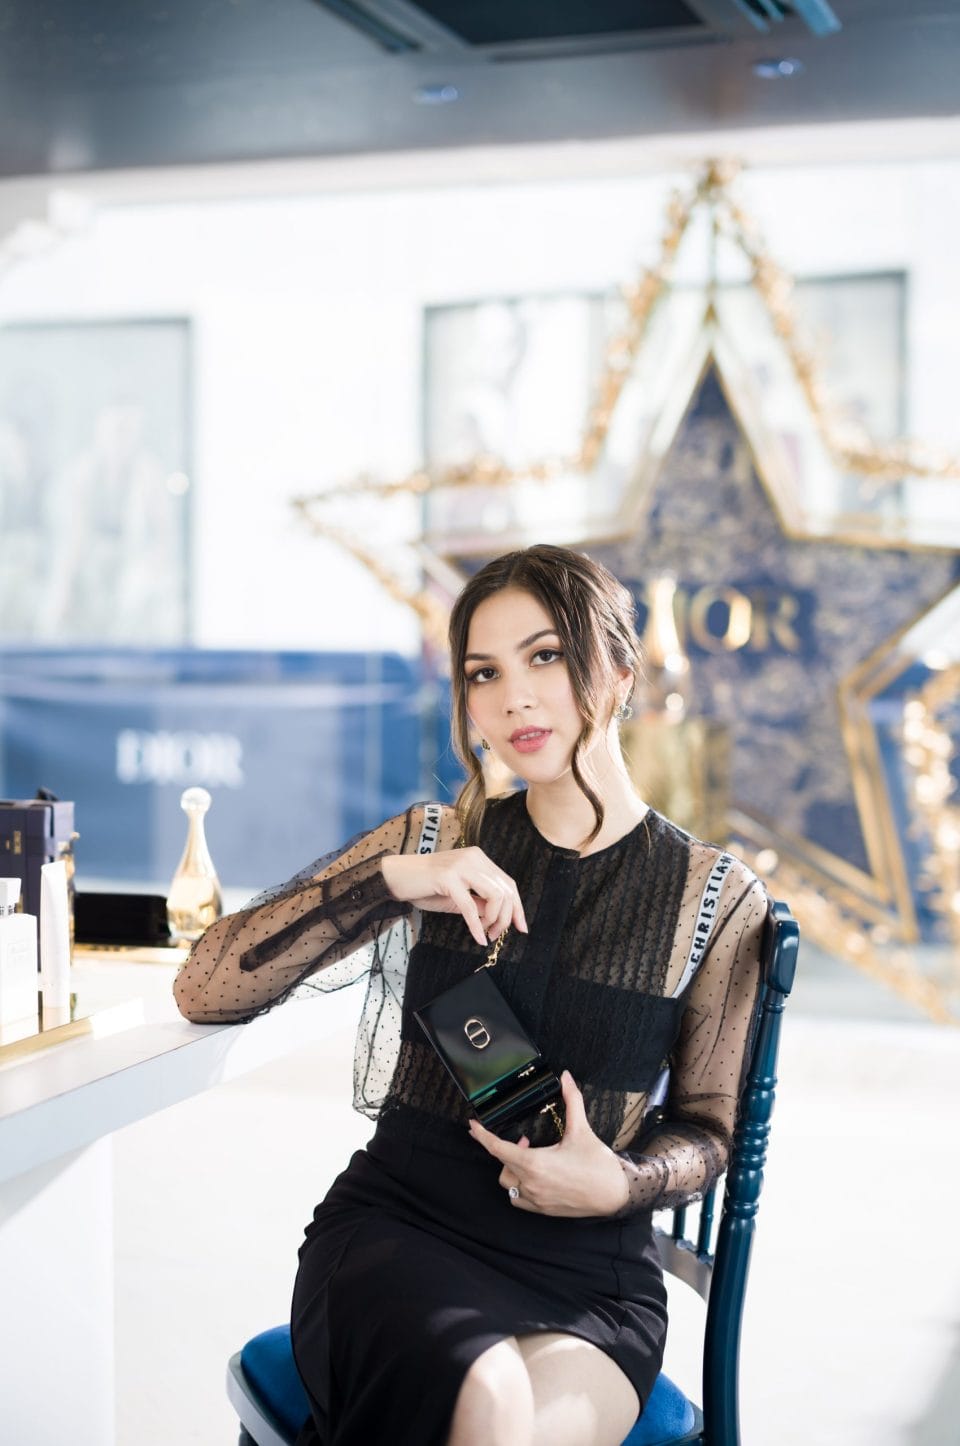 Dior's The Atelier of Dreams Pop-up Was A Star-Studded Affair